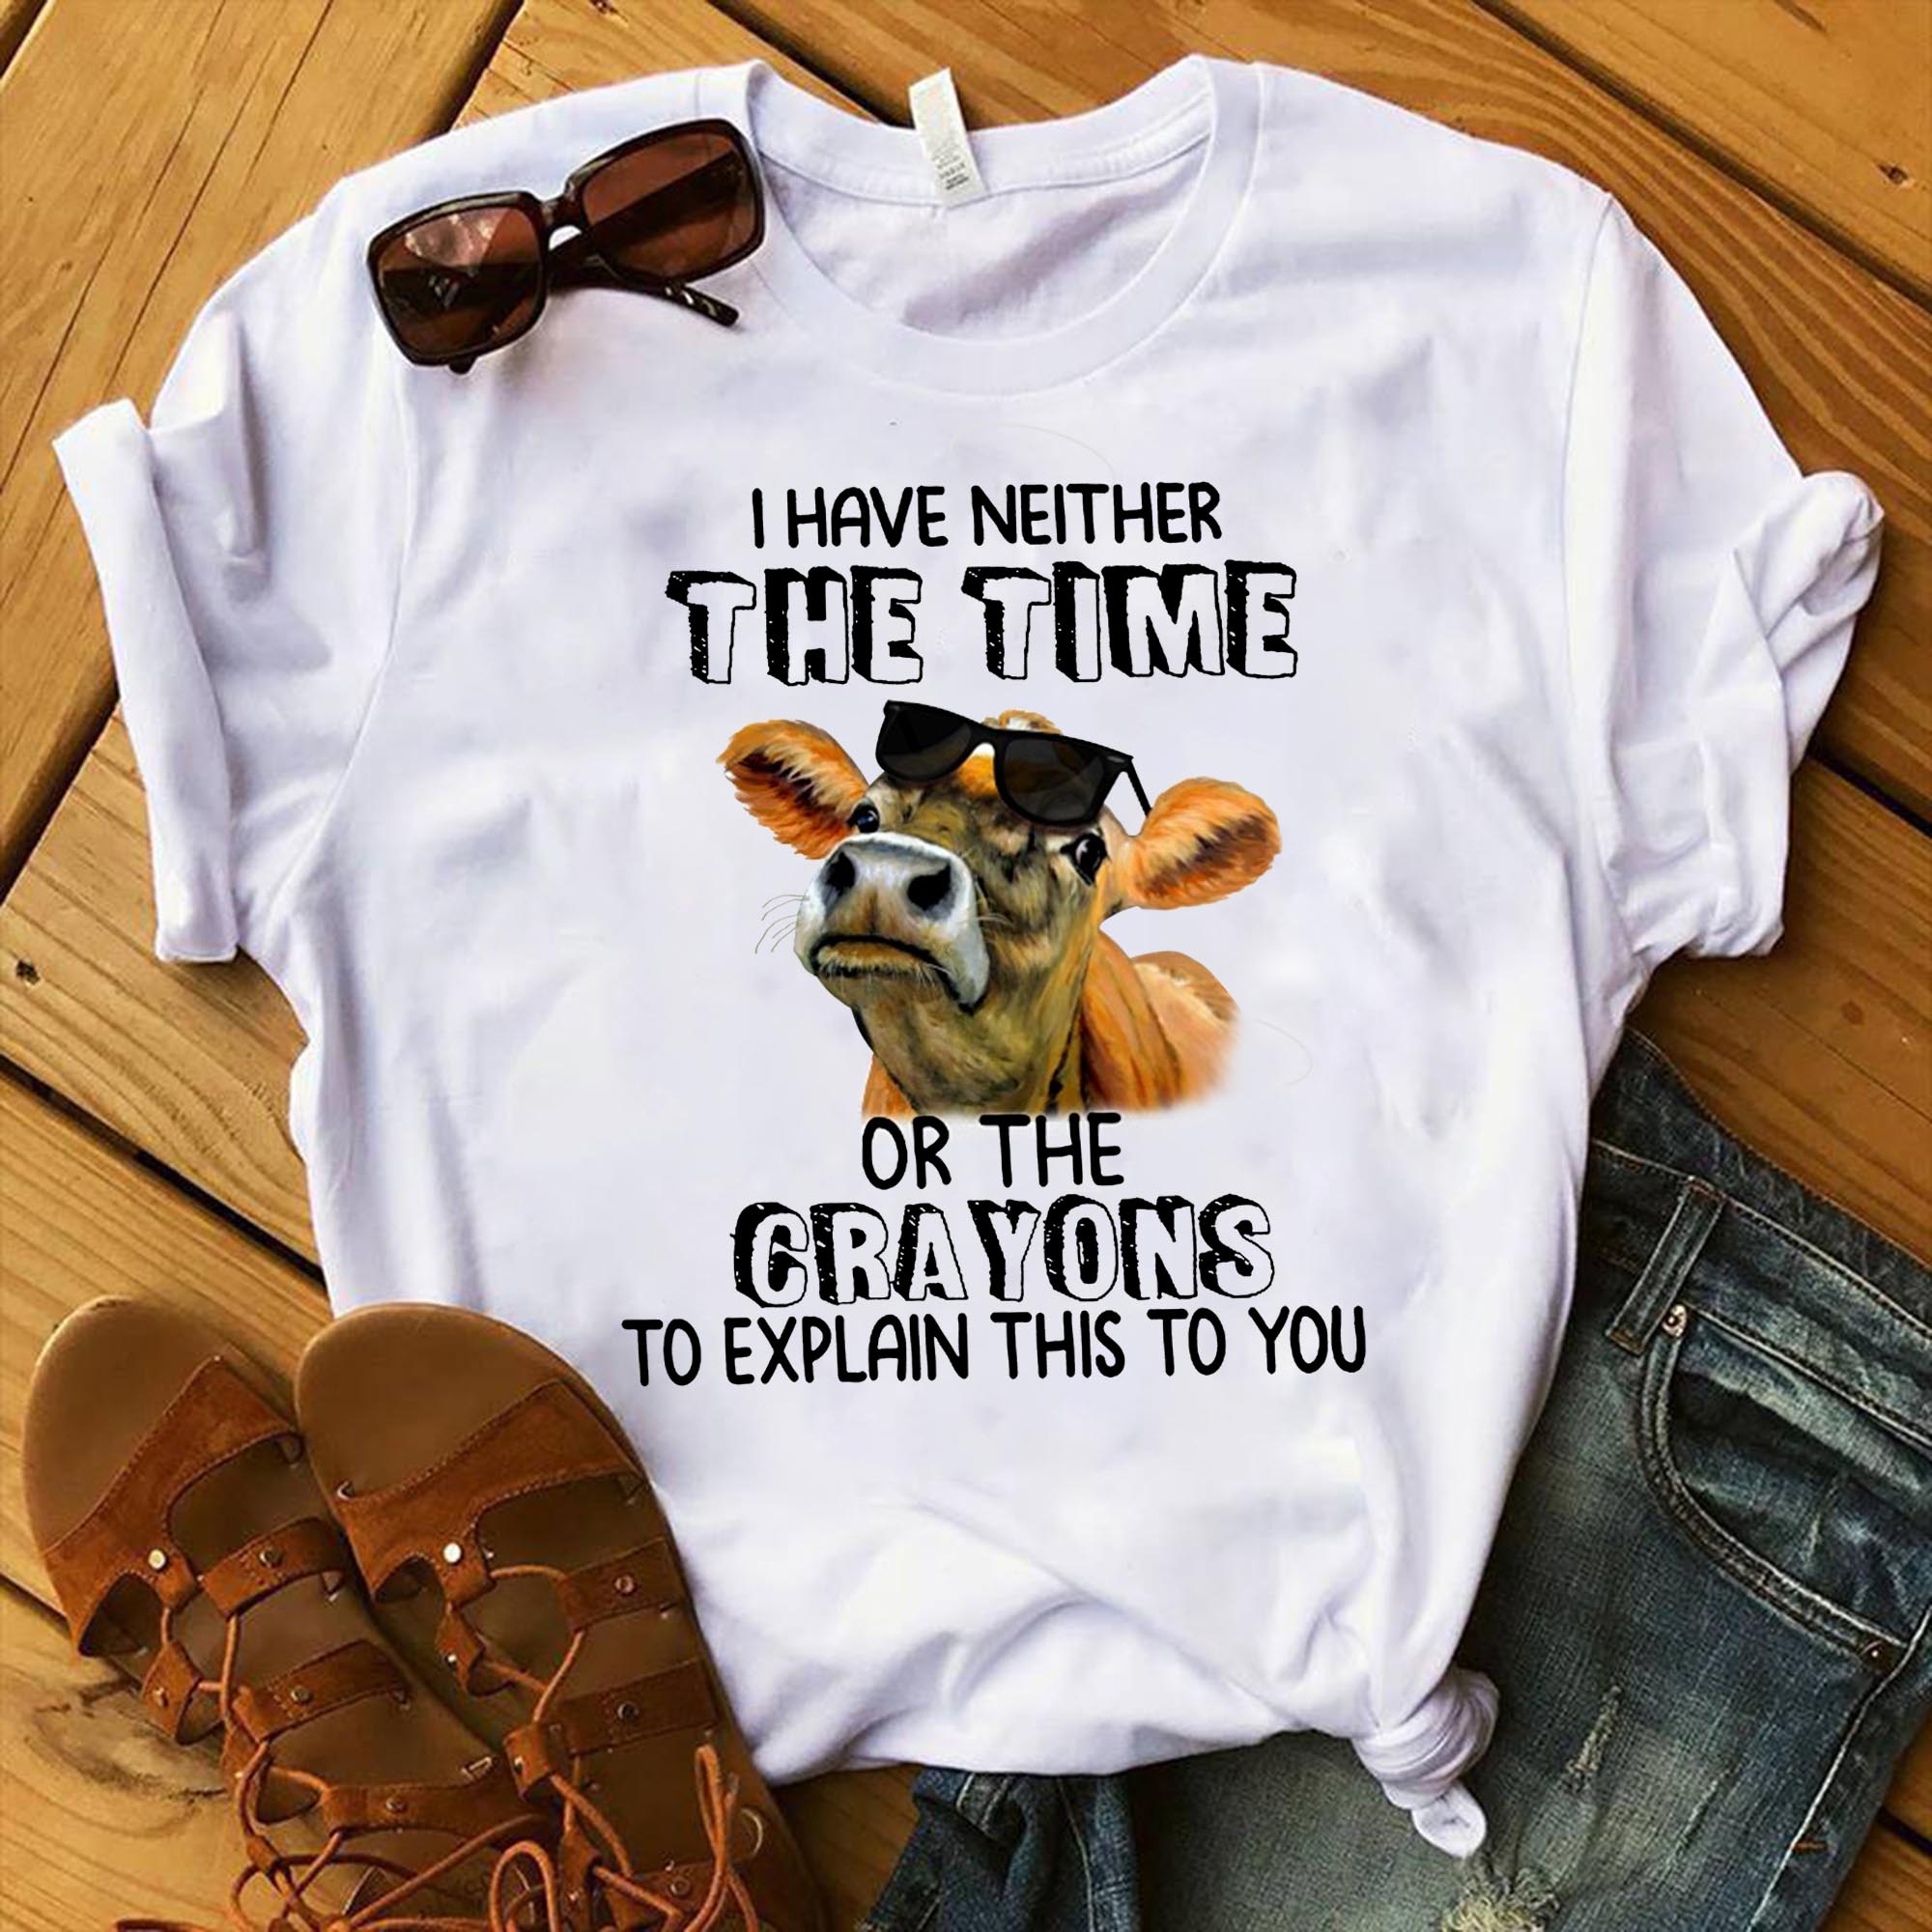 I Have Neither The Time Or The Crayons To Explan This To You Shirt, Cow Shirt, Funny Cow Shirt, Cow Cattle Shirt, Cow Farm Shirt, T-Shirt, Tee